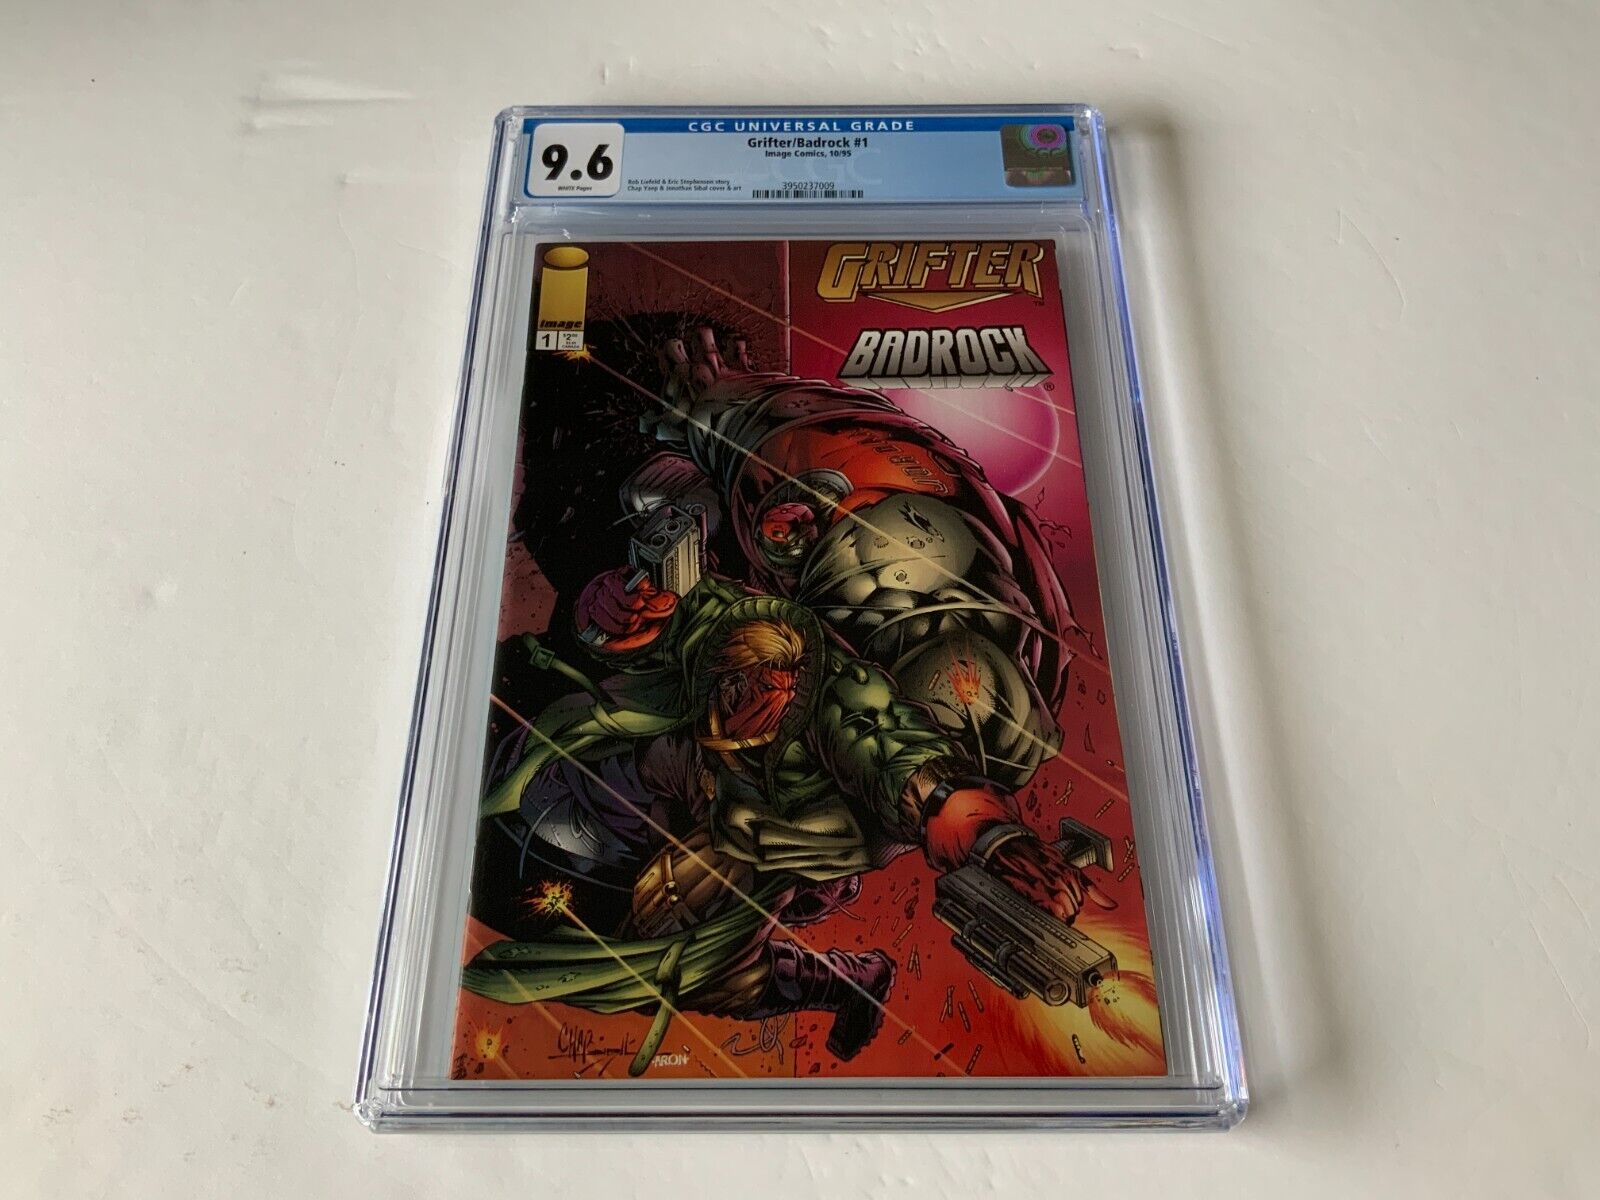 GRIFTER BADROCK 1 CGC 9.6 WHITE PAGES SINGLE HIGHEST GRADED IMAGE COMICS 1995